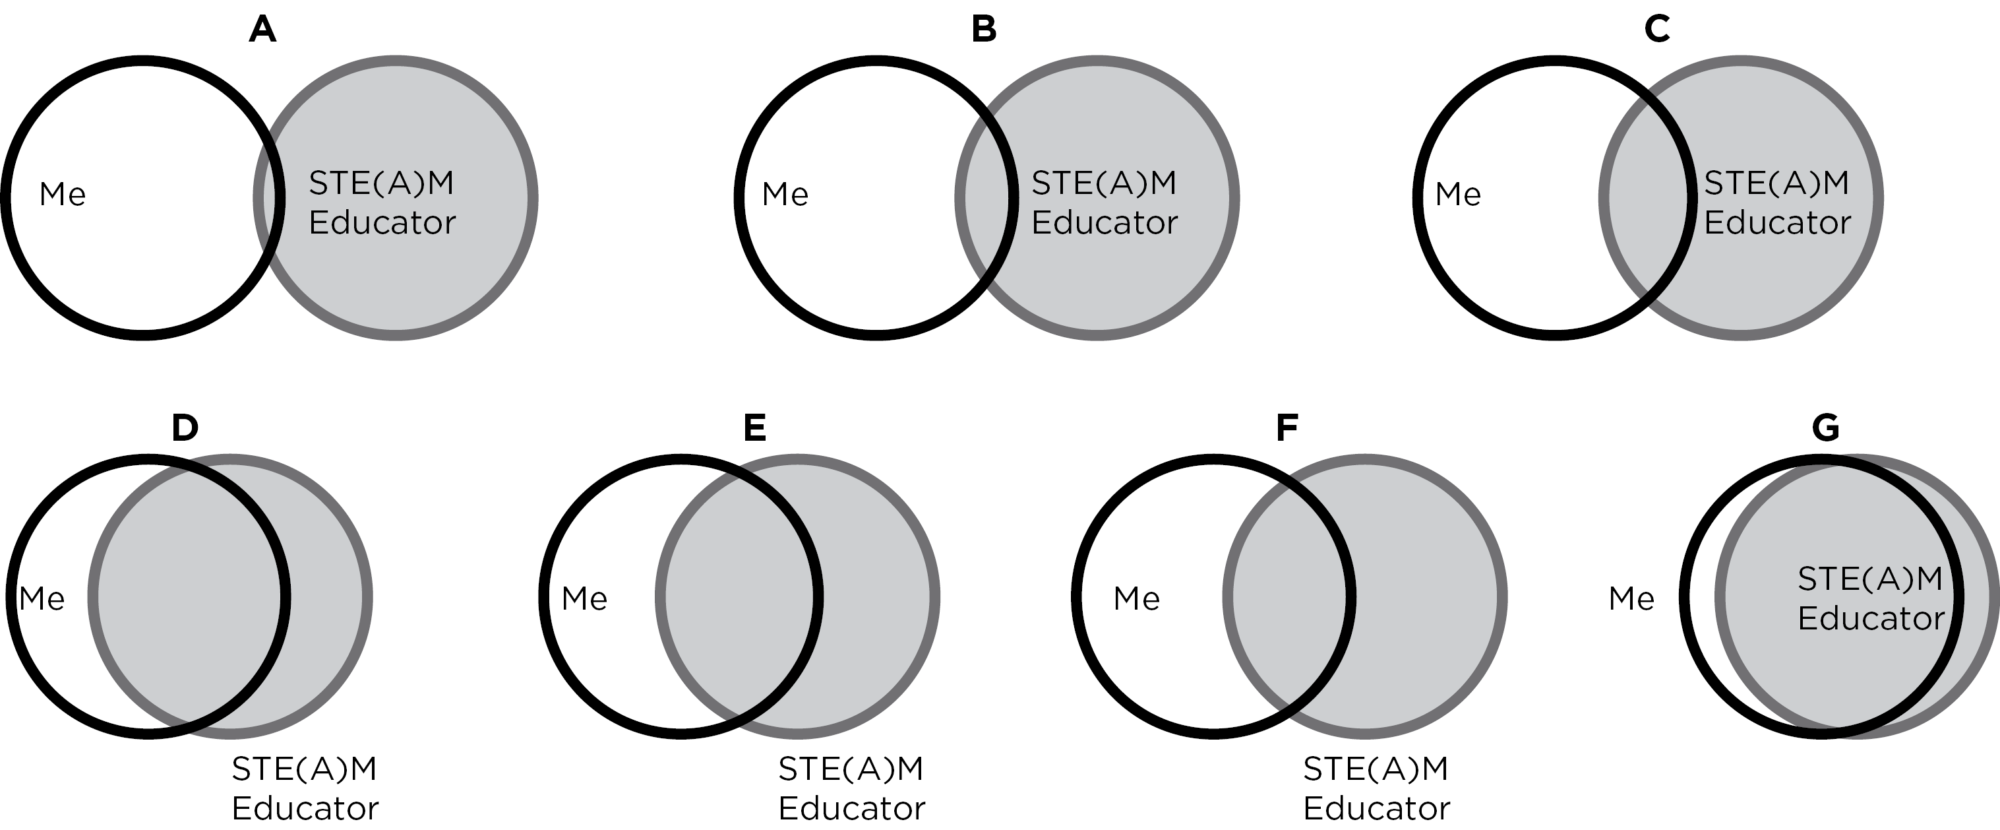 STEAM educator identification bubbles A (lowest) to G (highest)